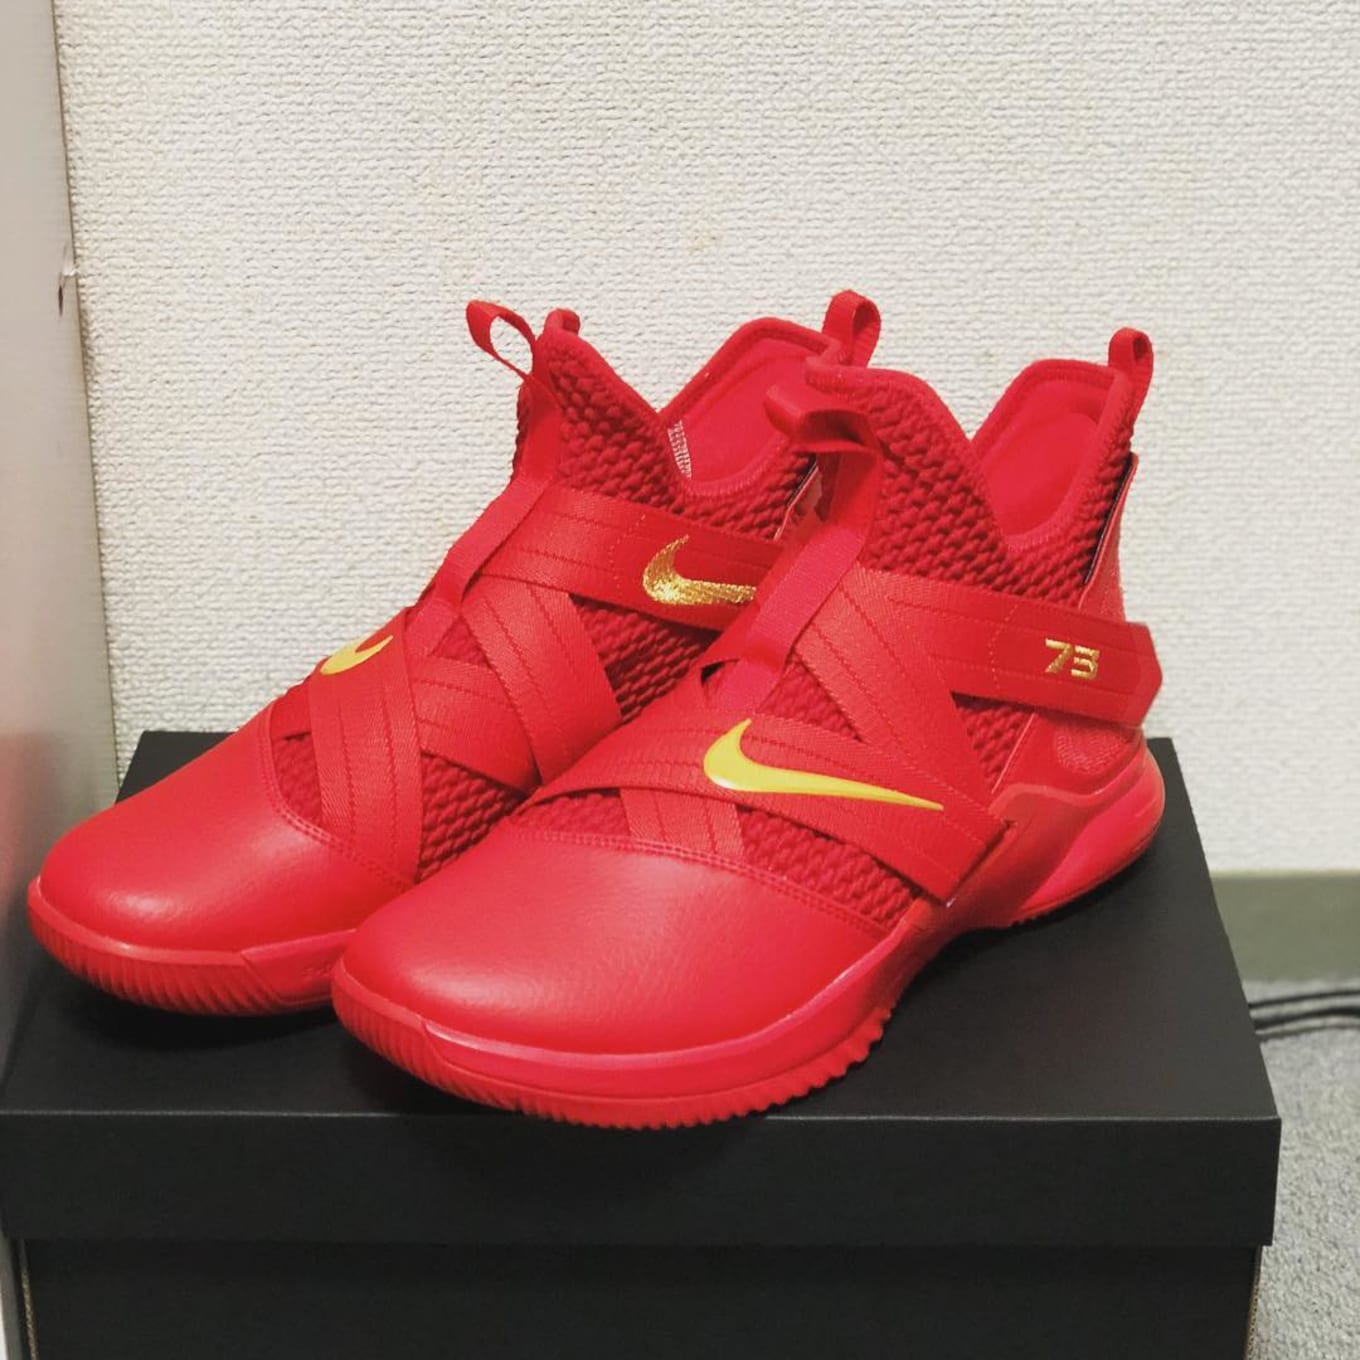 soldier 12 red